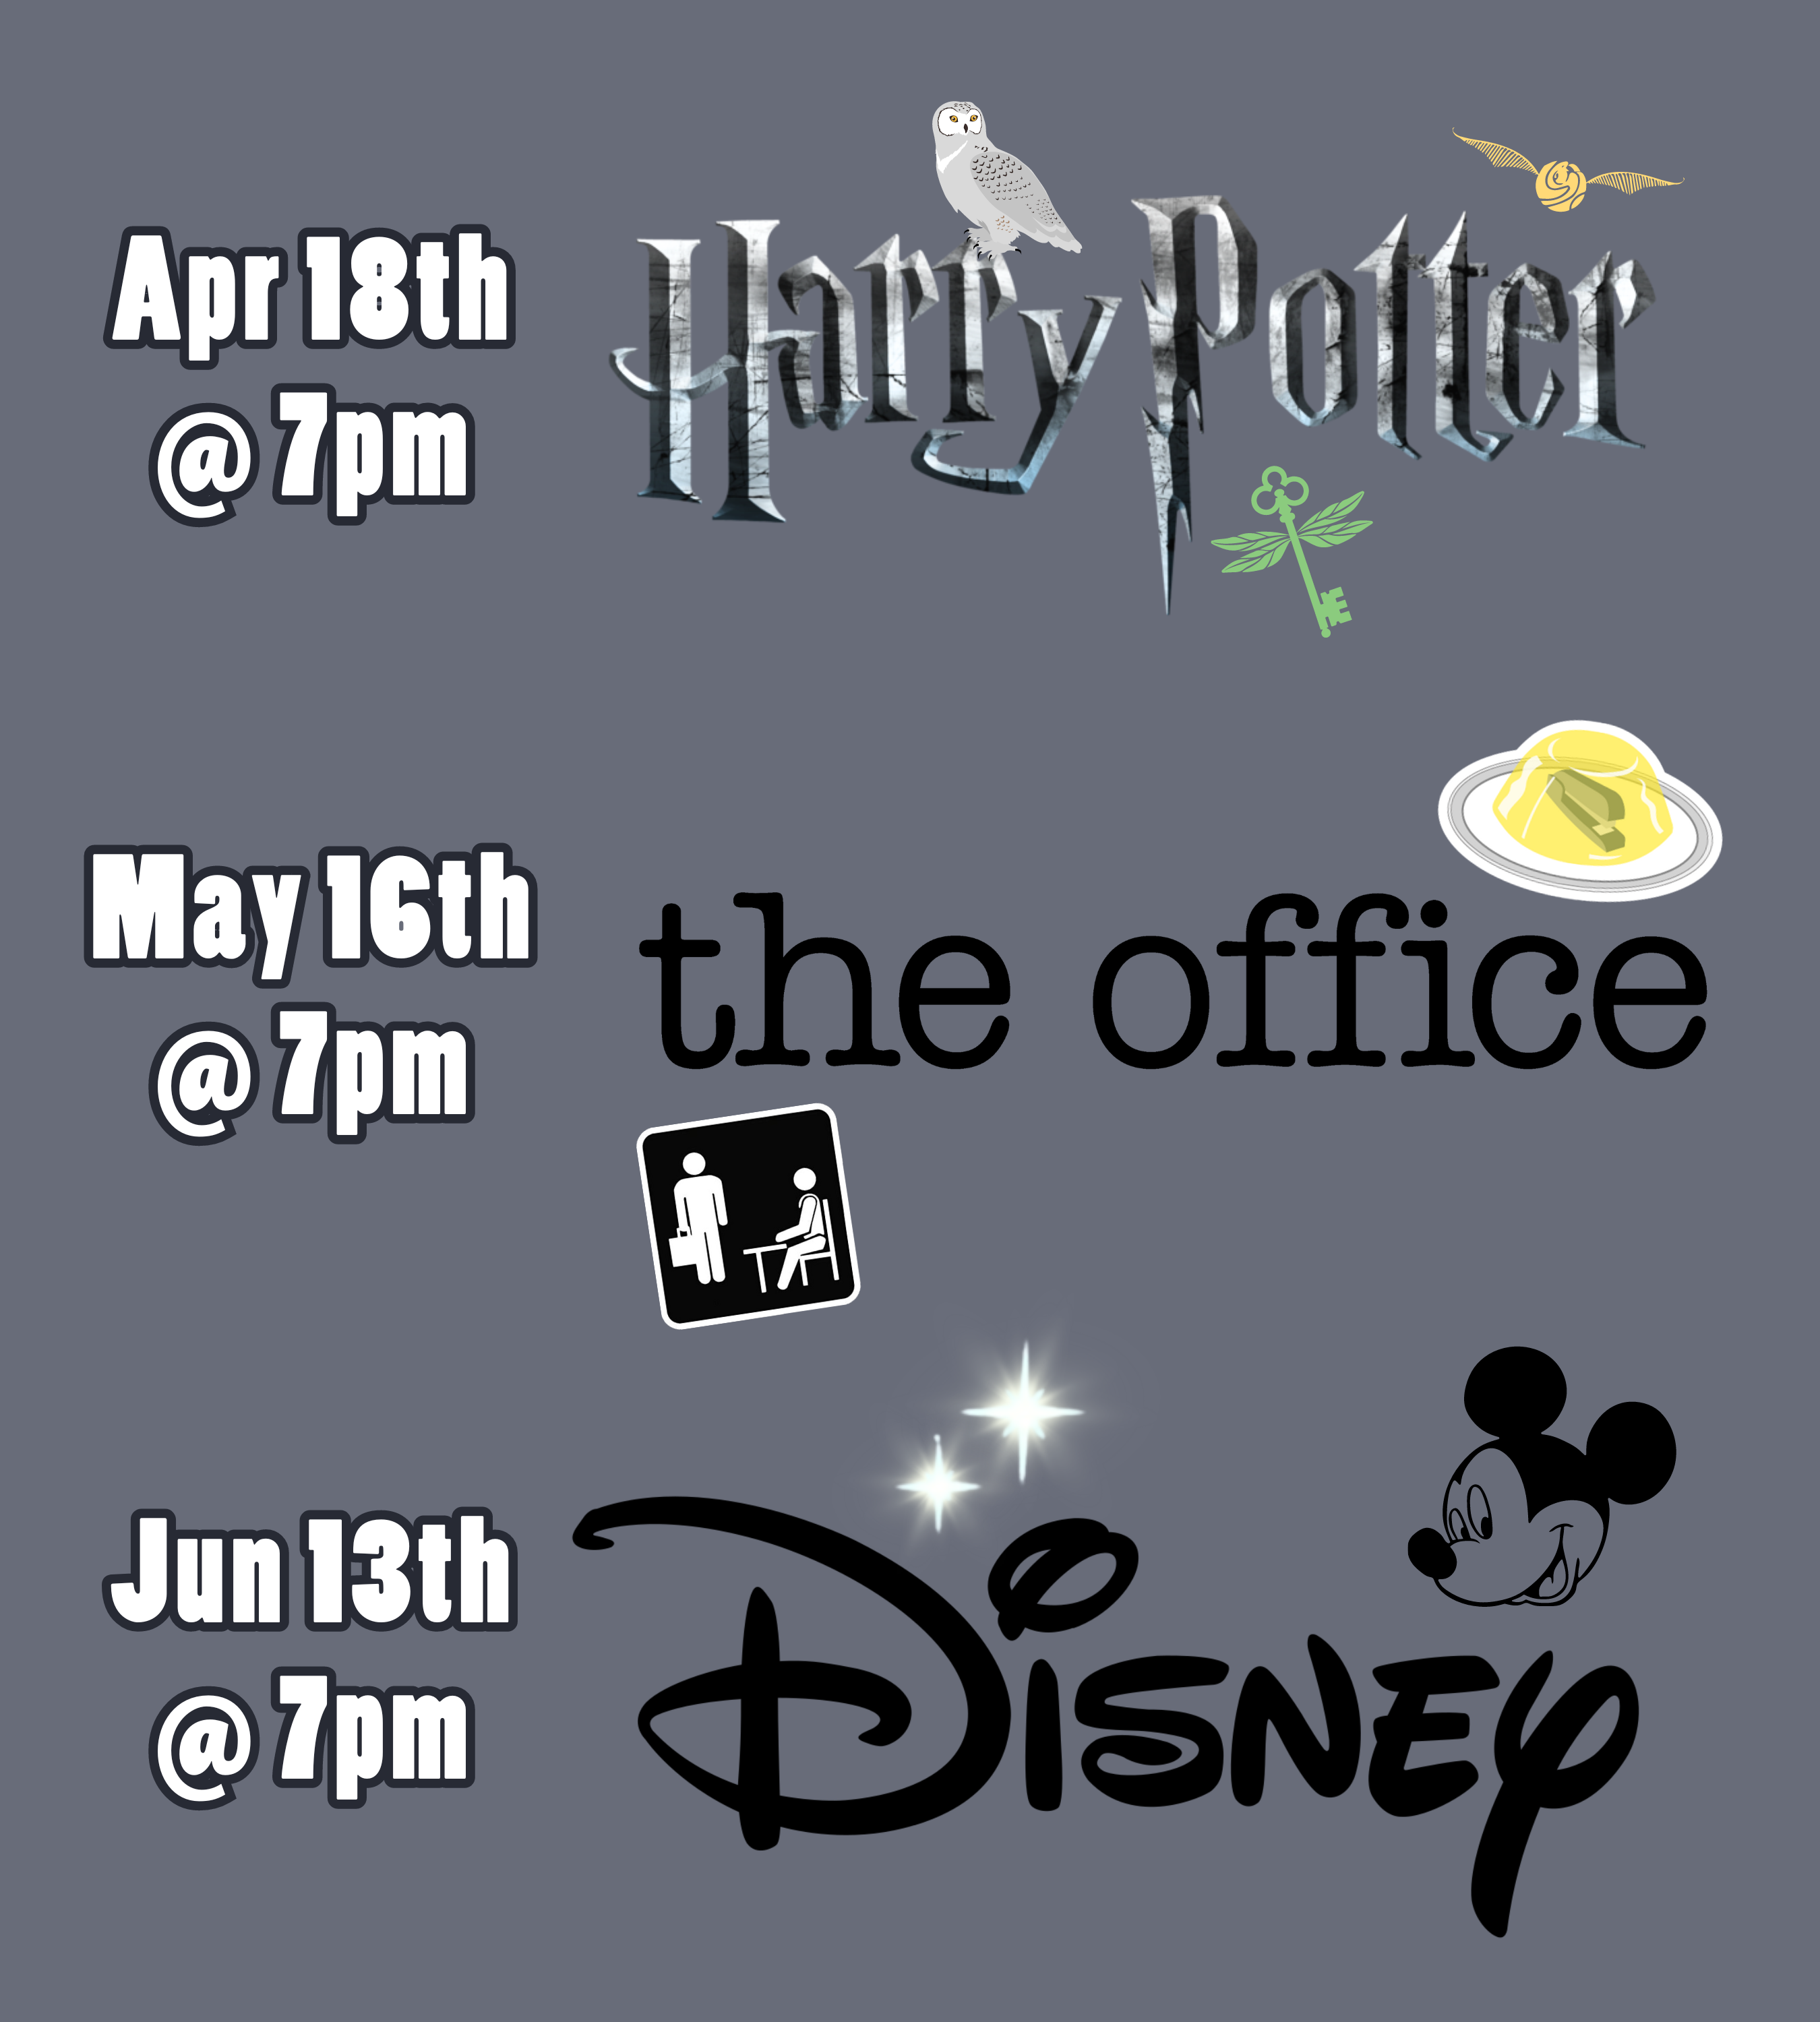 a medium gray background with text and logos. The text and logos read: April 18th at 7pm, Harry Potter. May 16th at 7pm, The Office. June 13th at 7pm, Disney.